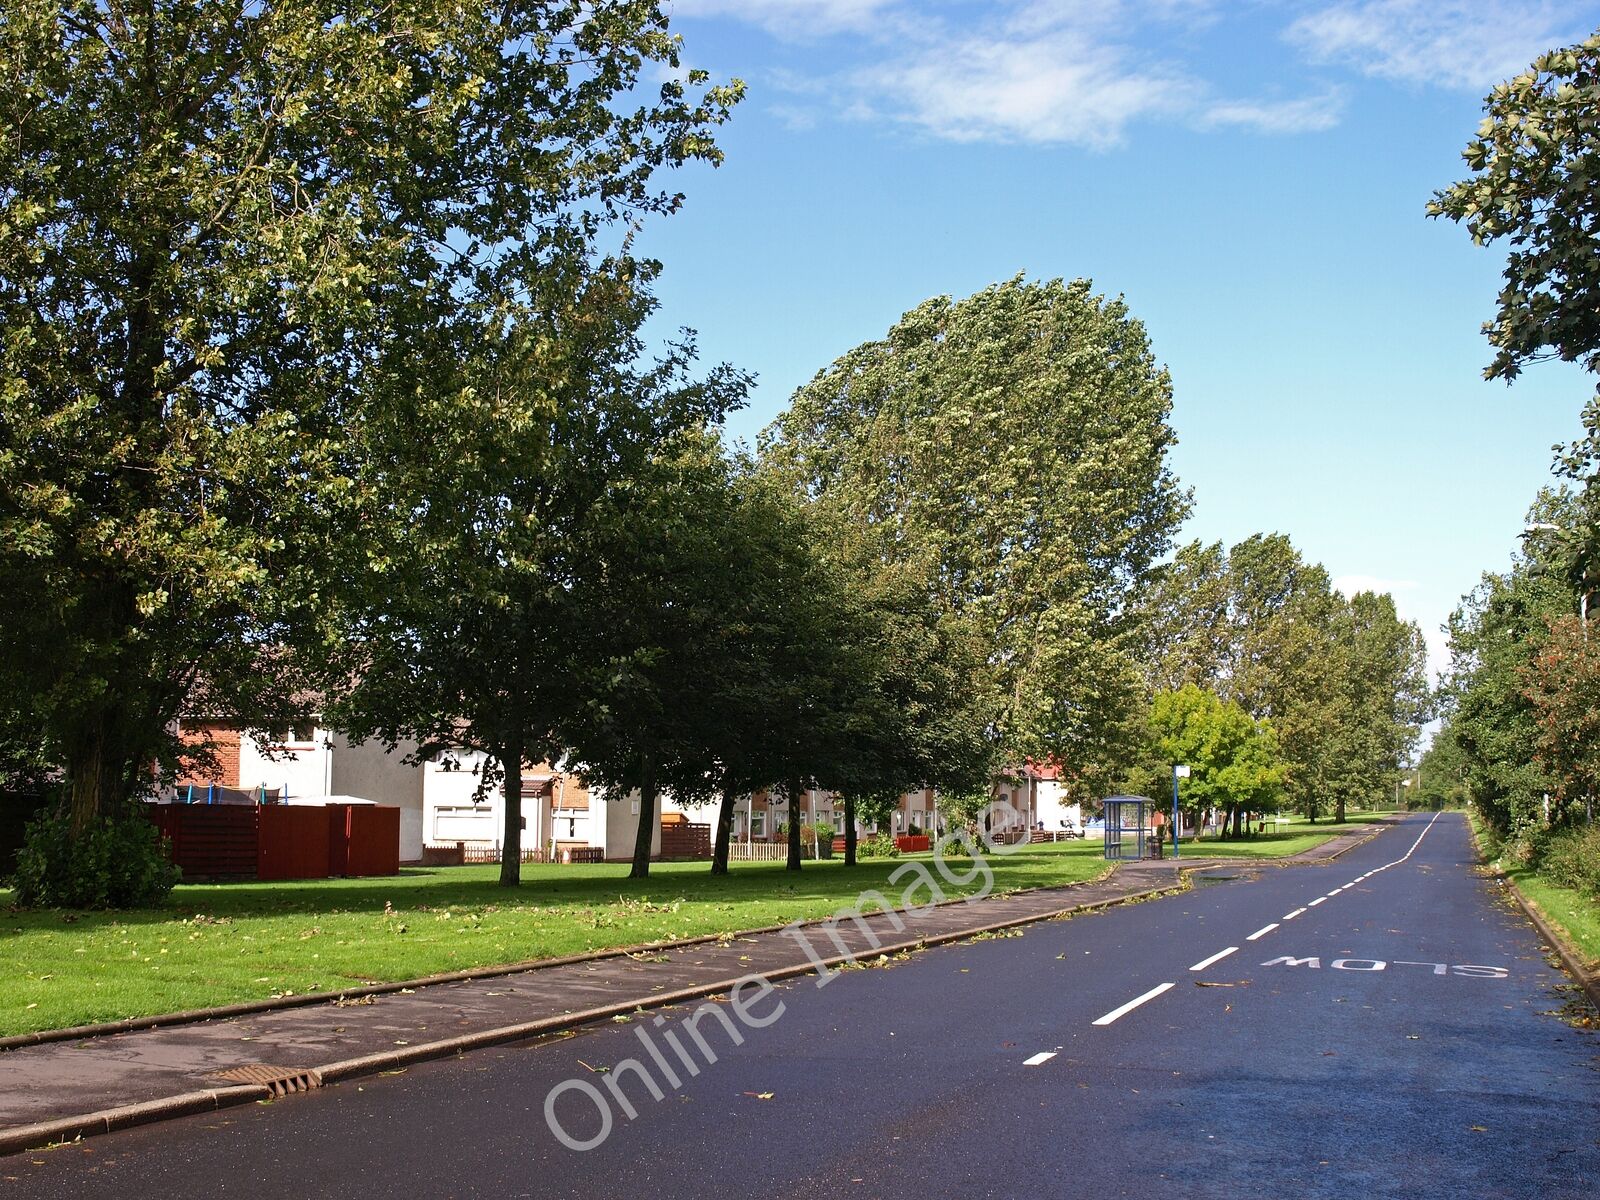 Photo 12x8 Castlepark, Irvine Tree lined ring road adjacent to the A78 Byp c2010